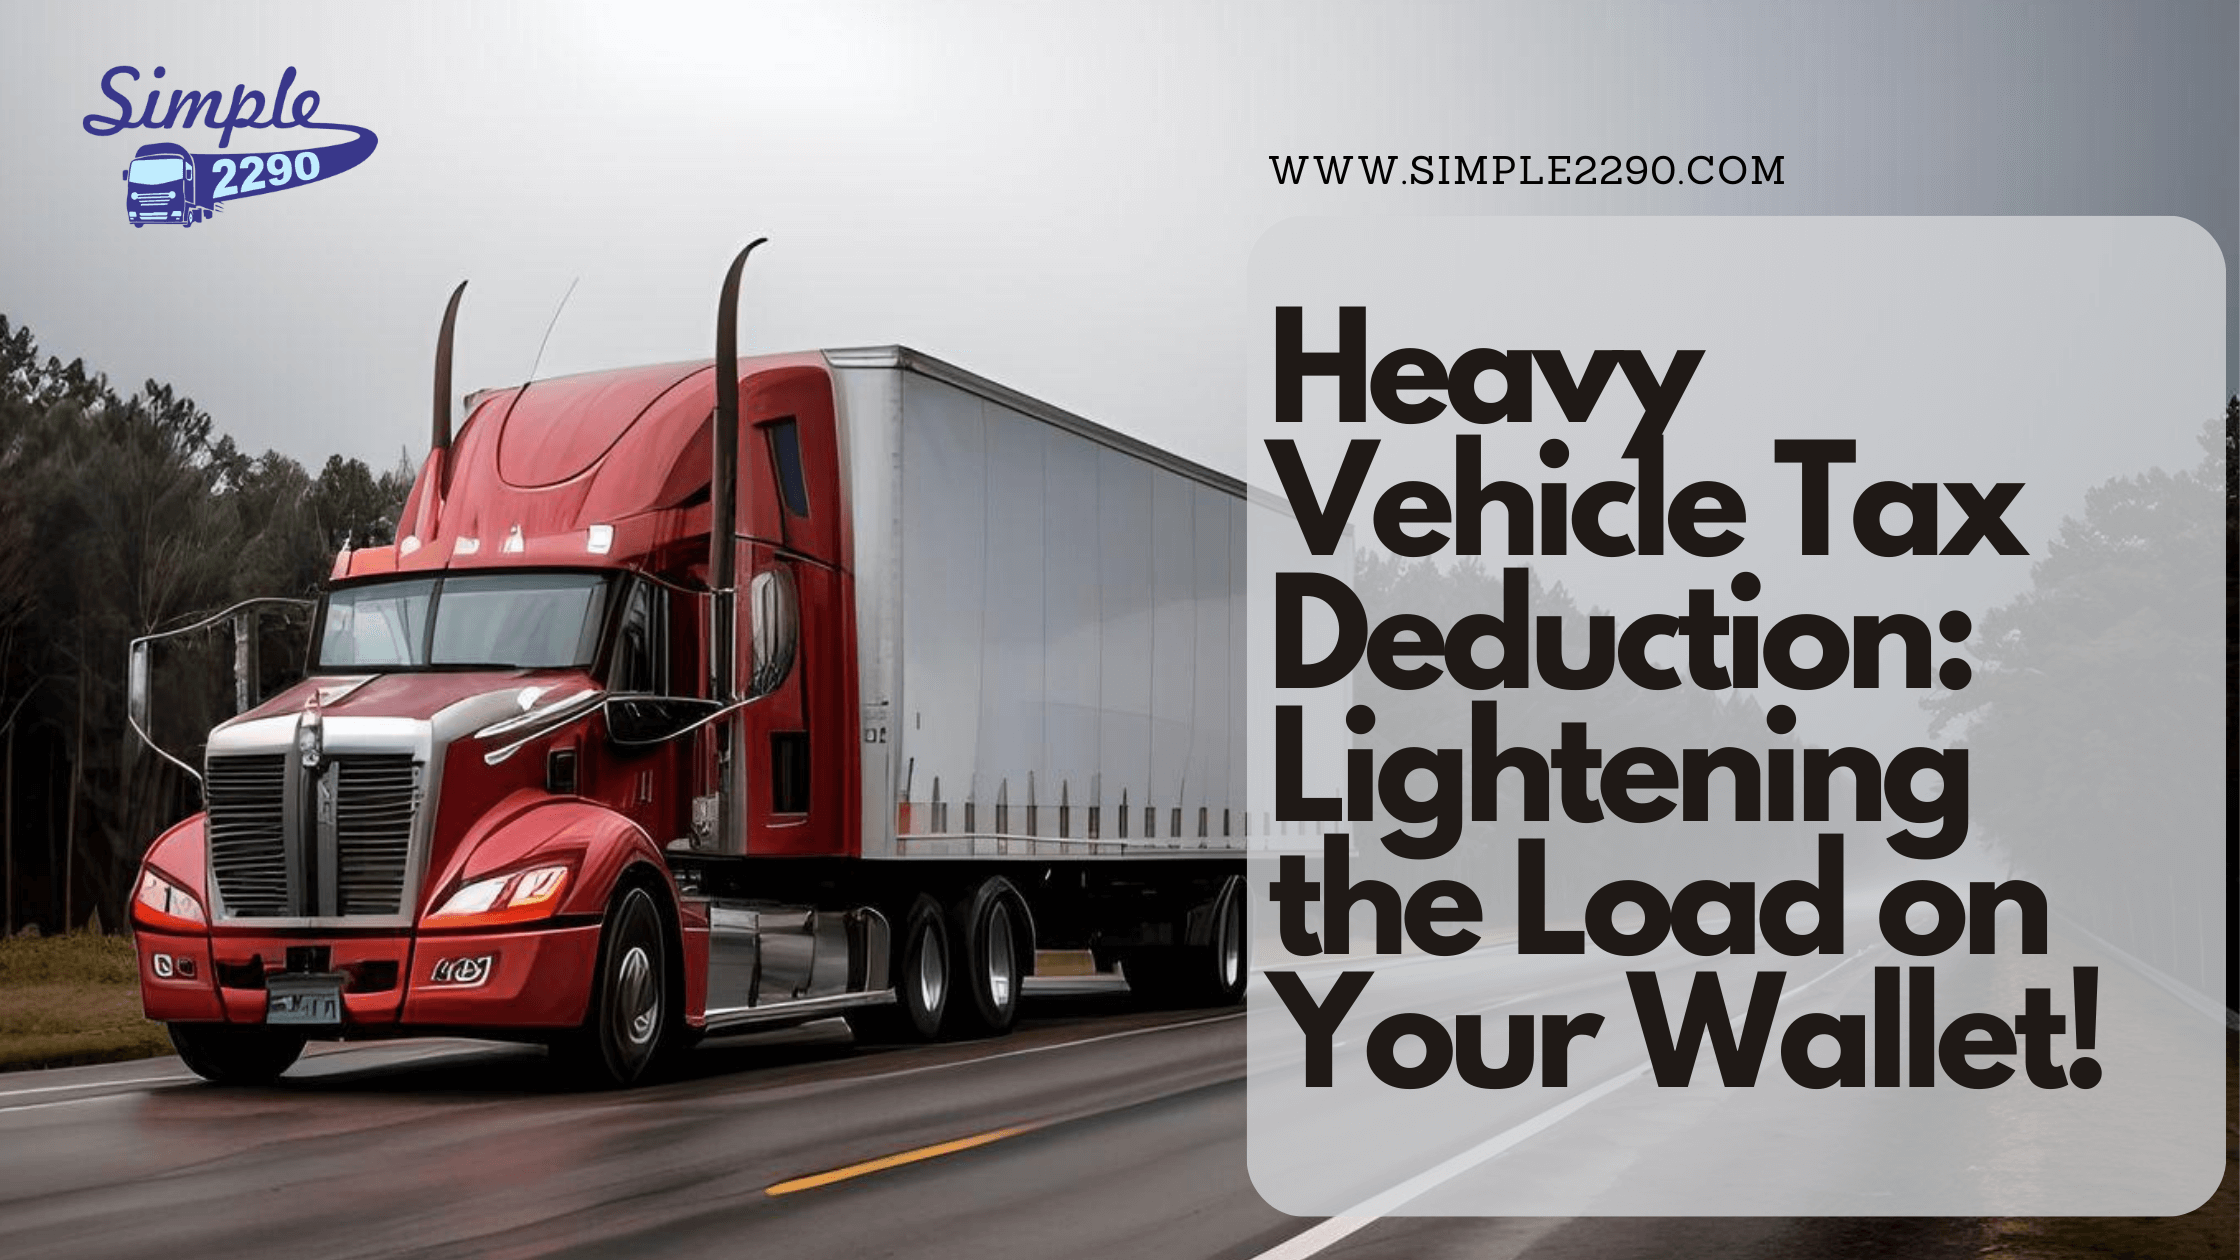 Heavy Vehicle Tax Deduction: Lightening the Load on Your Wallet!